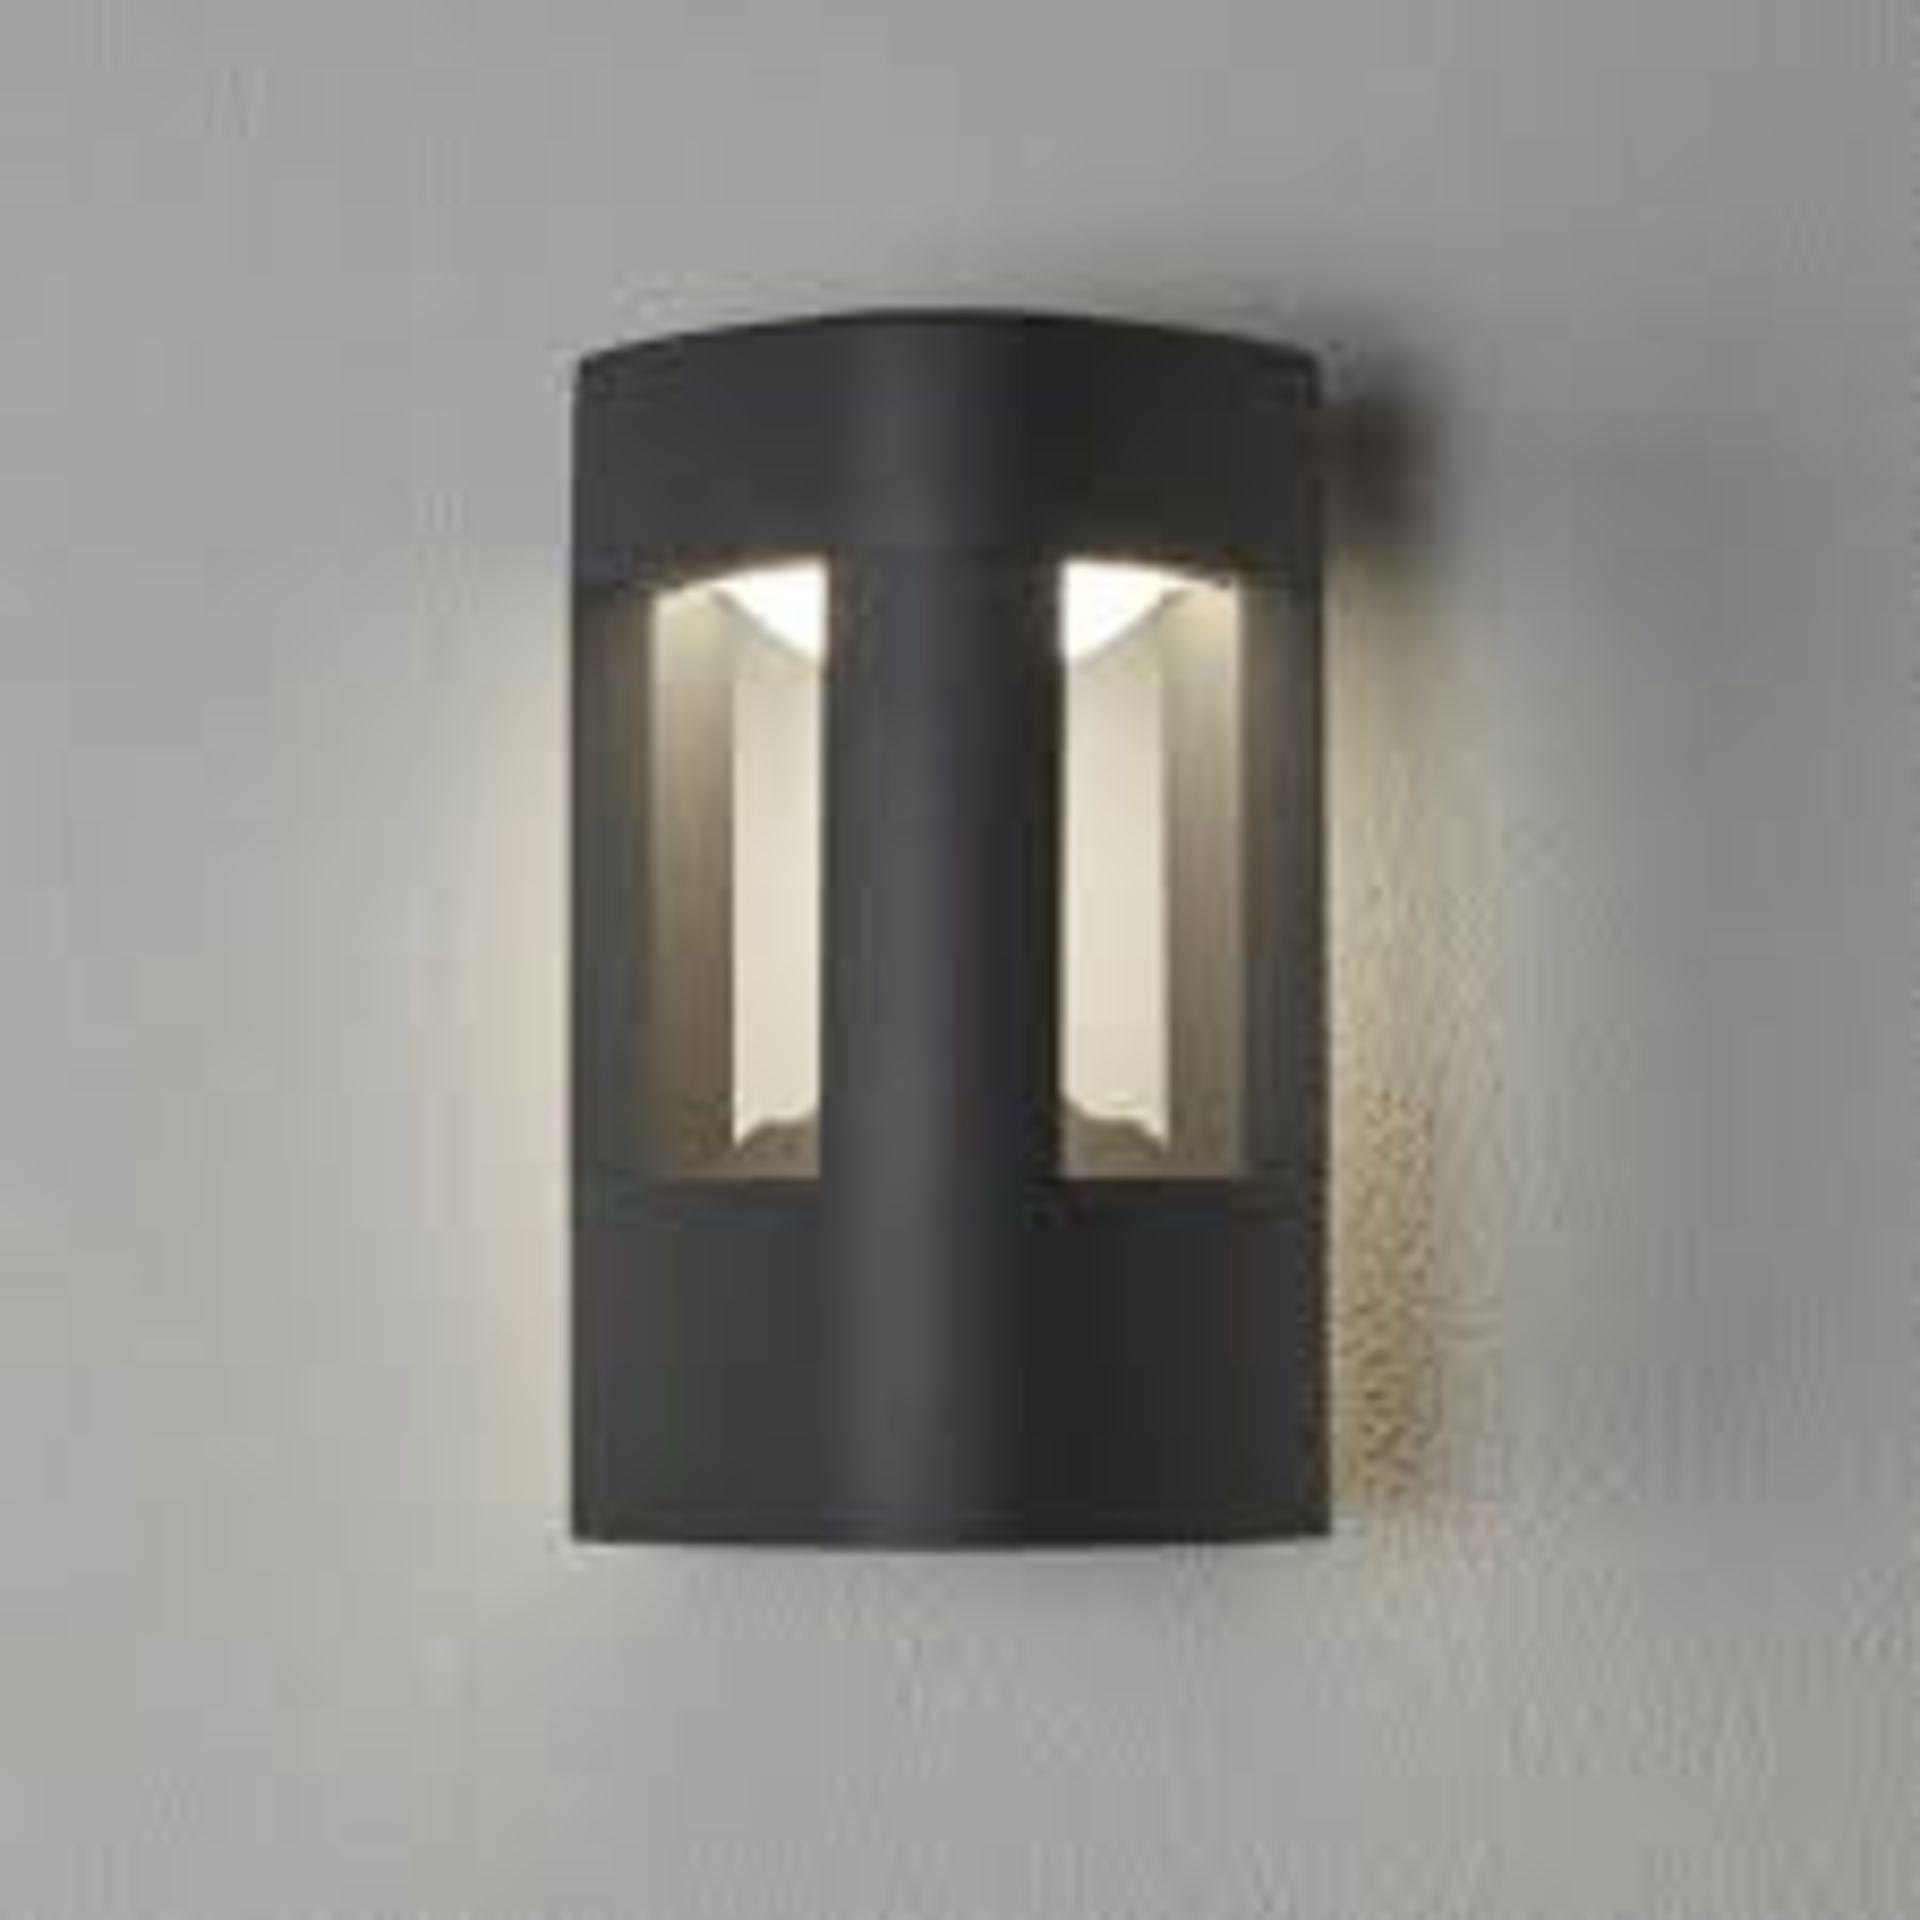 2 x Searchlight LED Outdoor Wall Light - Ref: 2005GY - New and Boxed Stock - RRP: £105(each) - Image 4 of 4